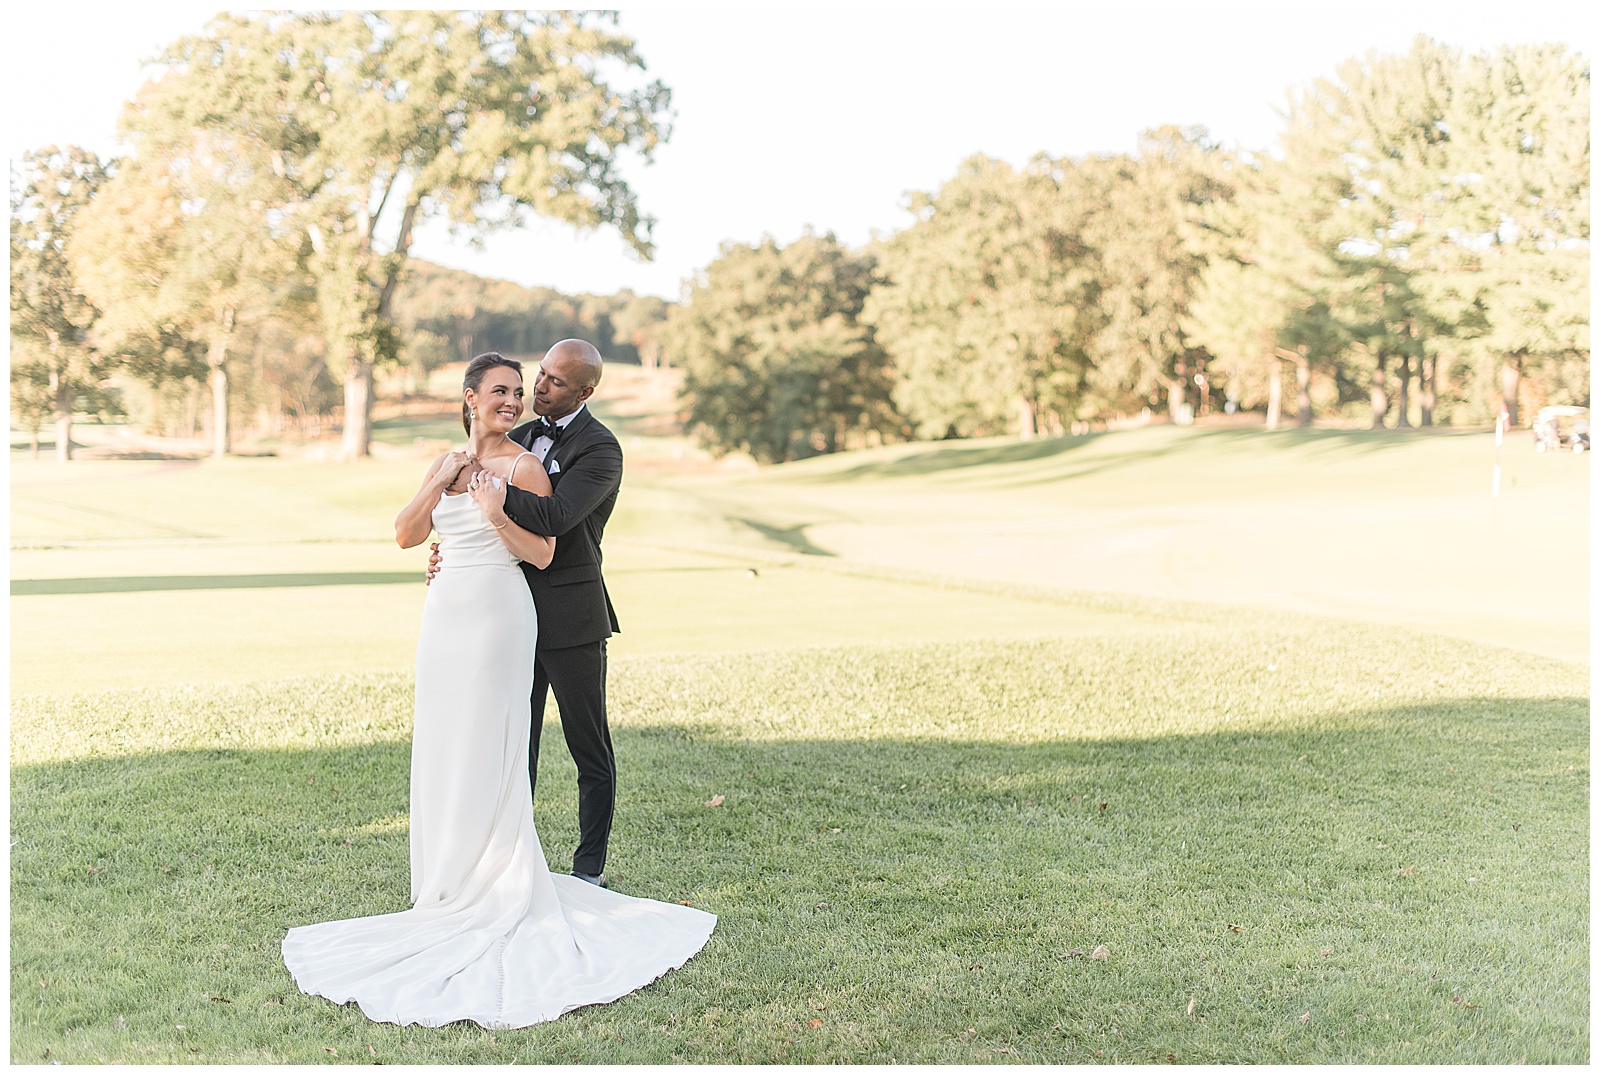 groom hugging bride from behind as she holds onto his arms and they smile on sunny golf course at north jersey country club